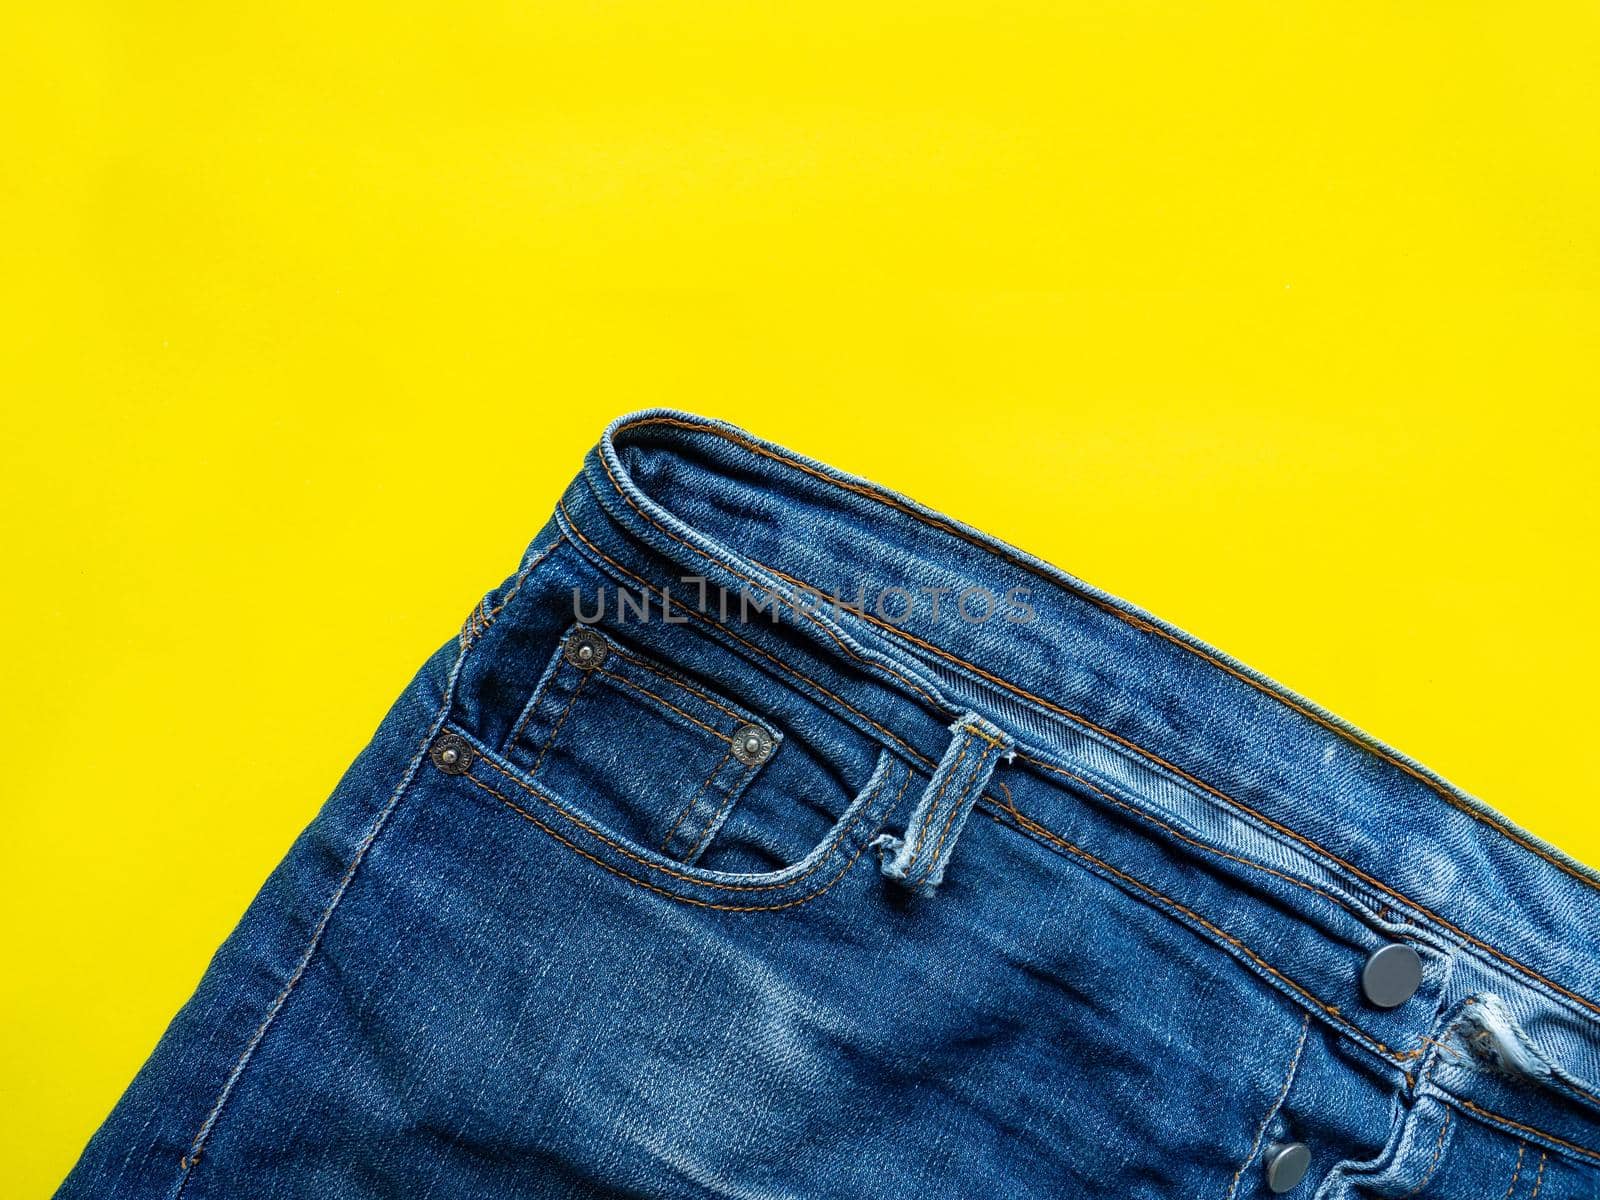 Blue pants Saw the fine pattern of the fabric Put on a yellow background